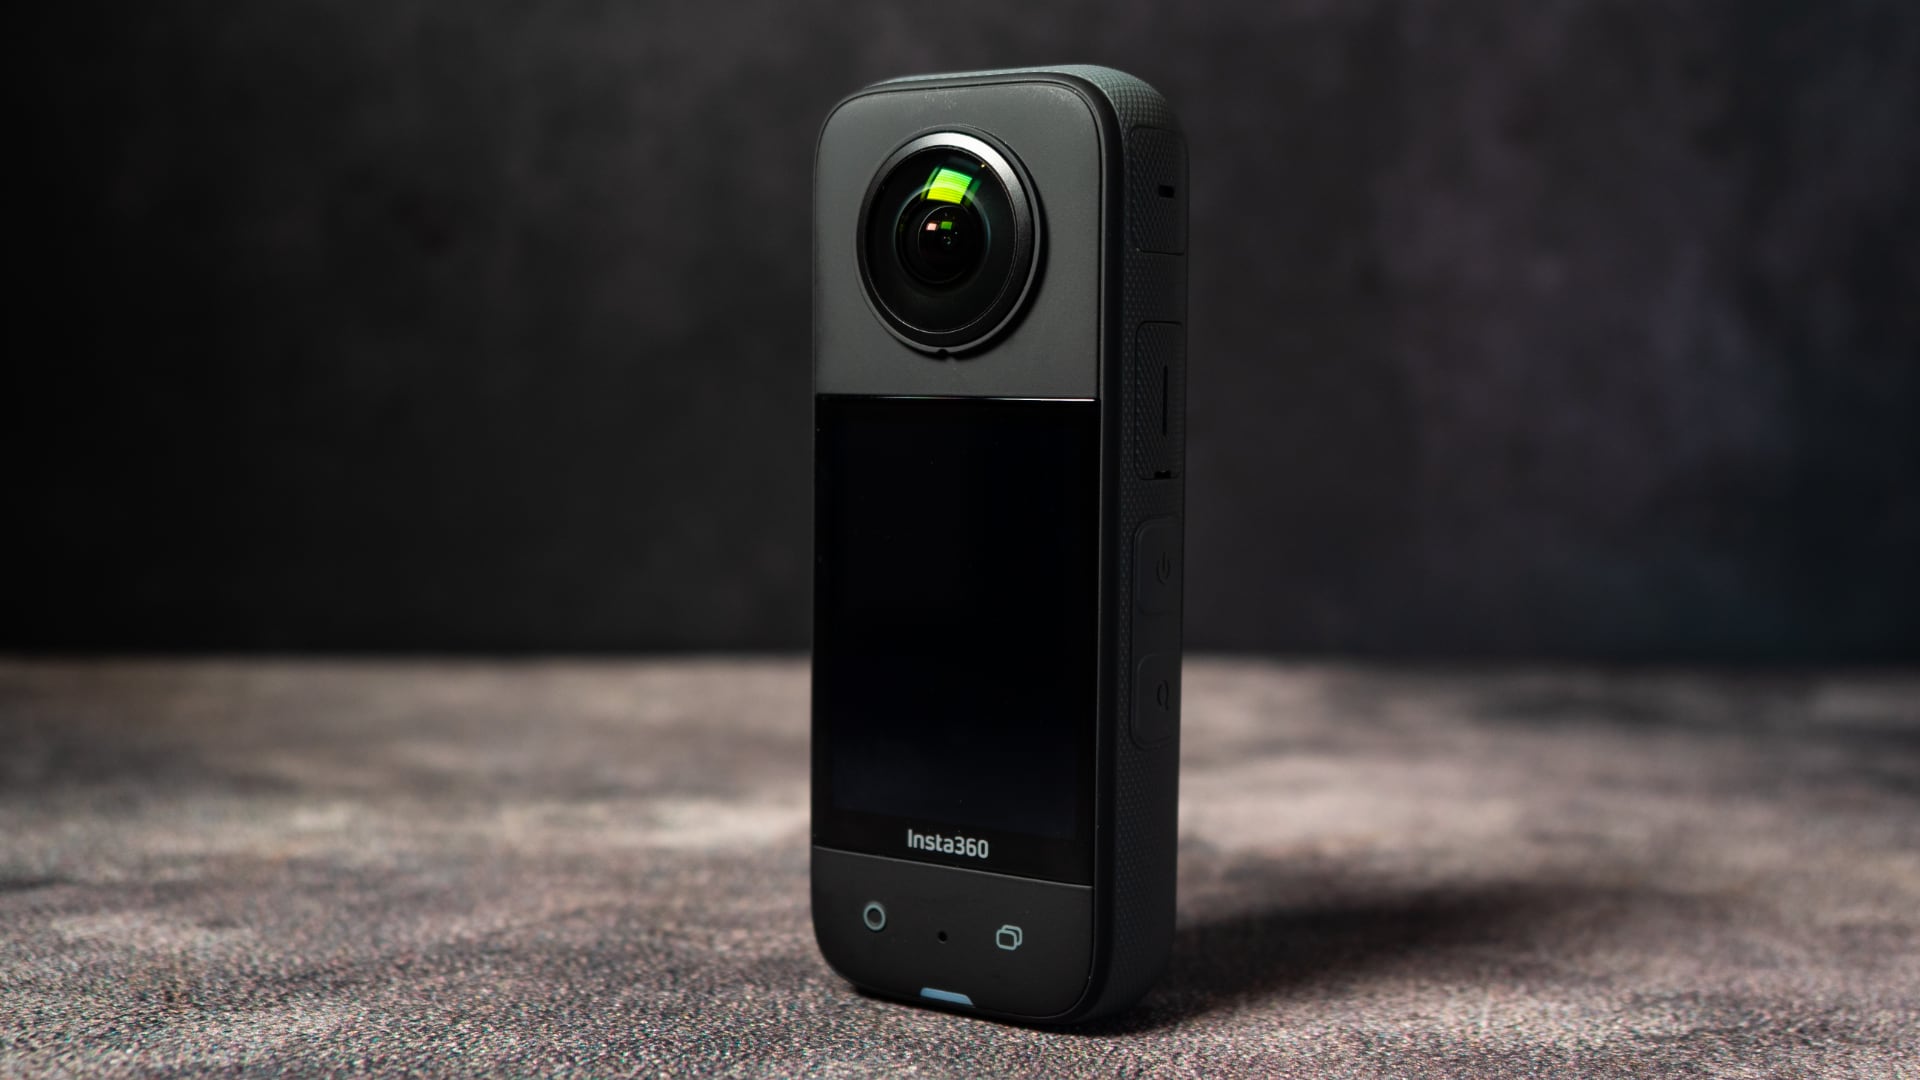 Theseus veiling Pasen Insta360 X3 360 action camera review part one